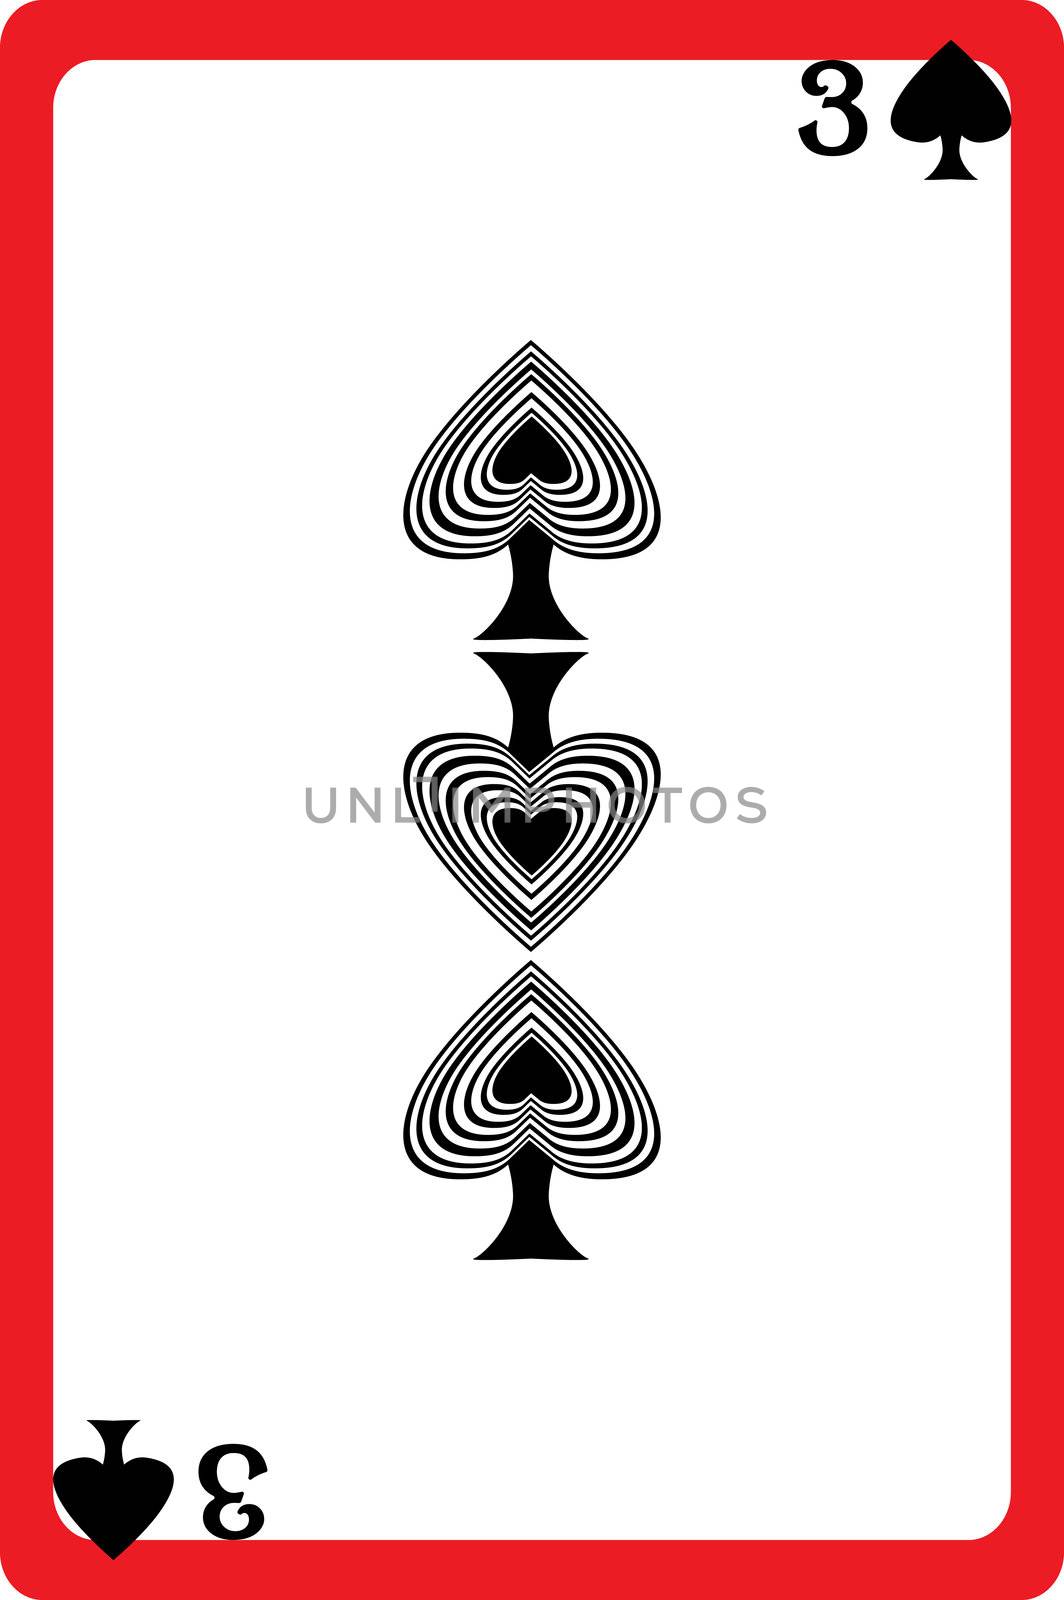 Scale hand drawn illustration of a playing card representing the three of spades, one element of a deck